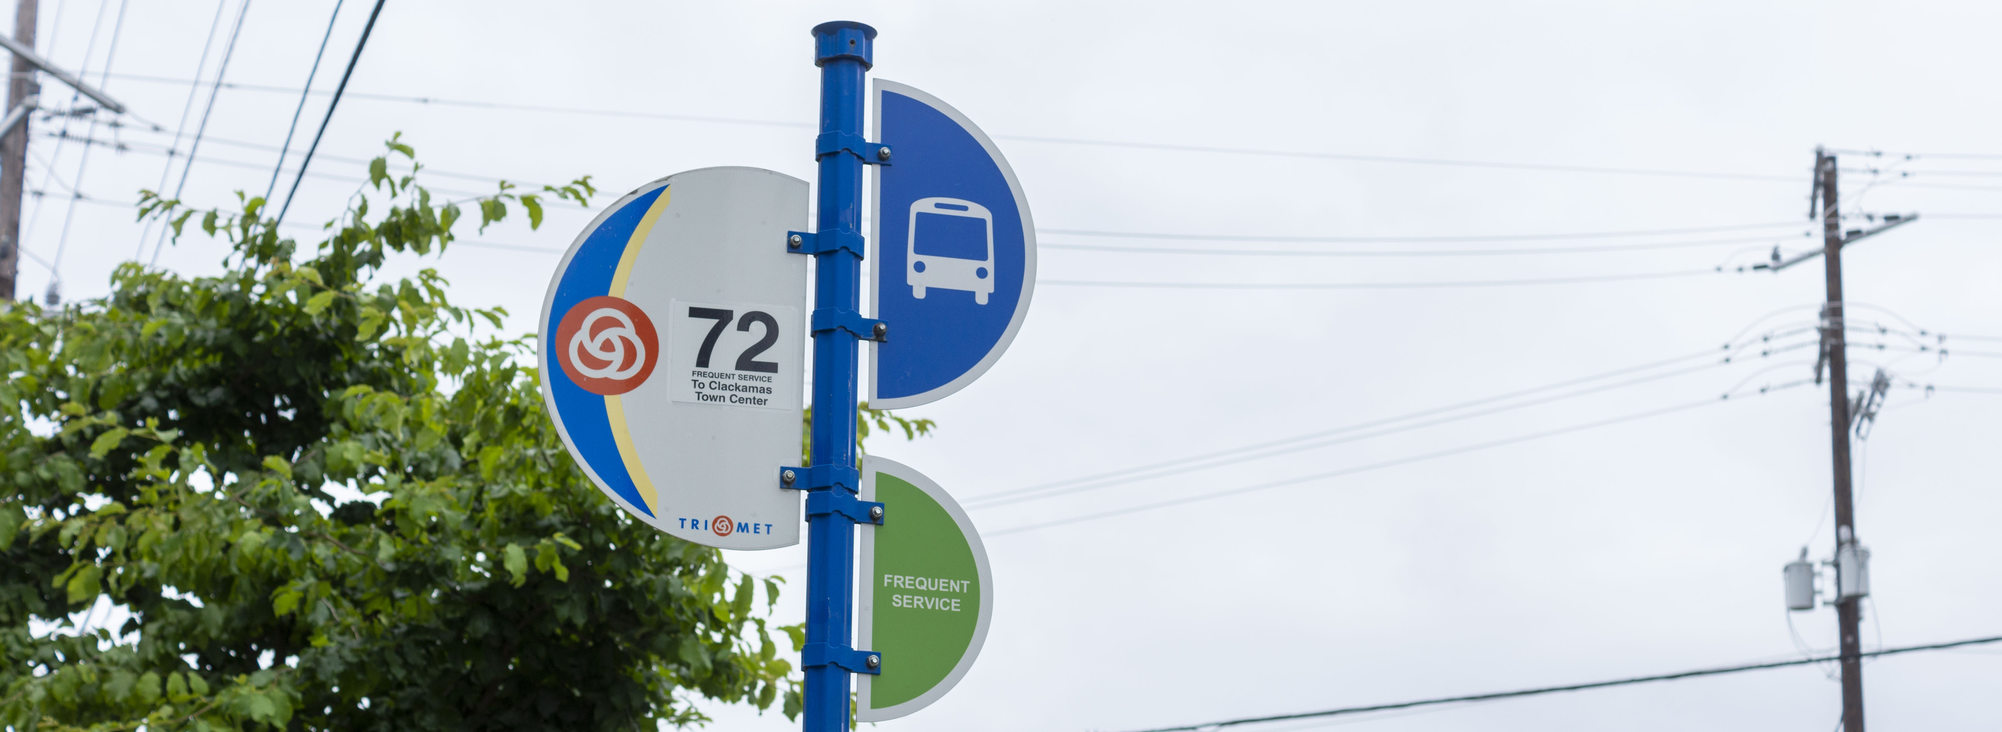 Line 72 bus stop sign with tree, power pole and sky background